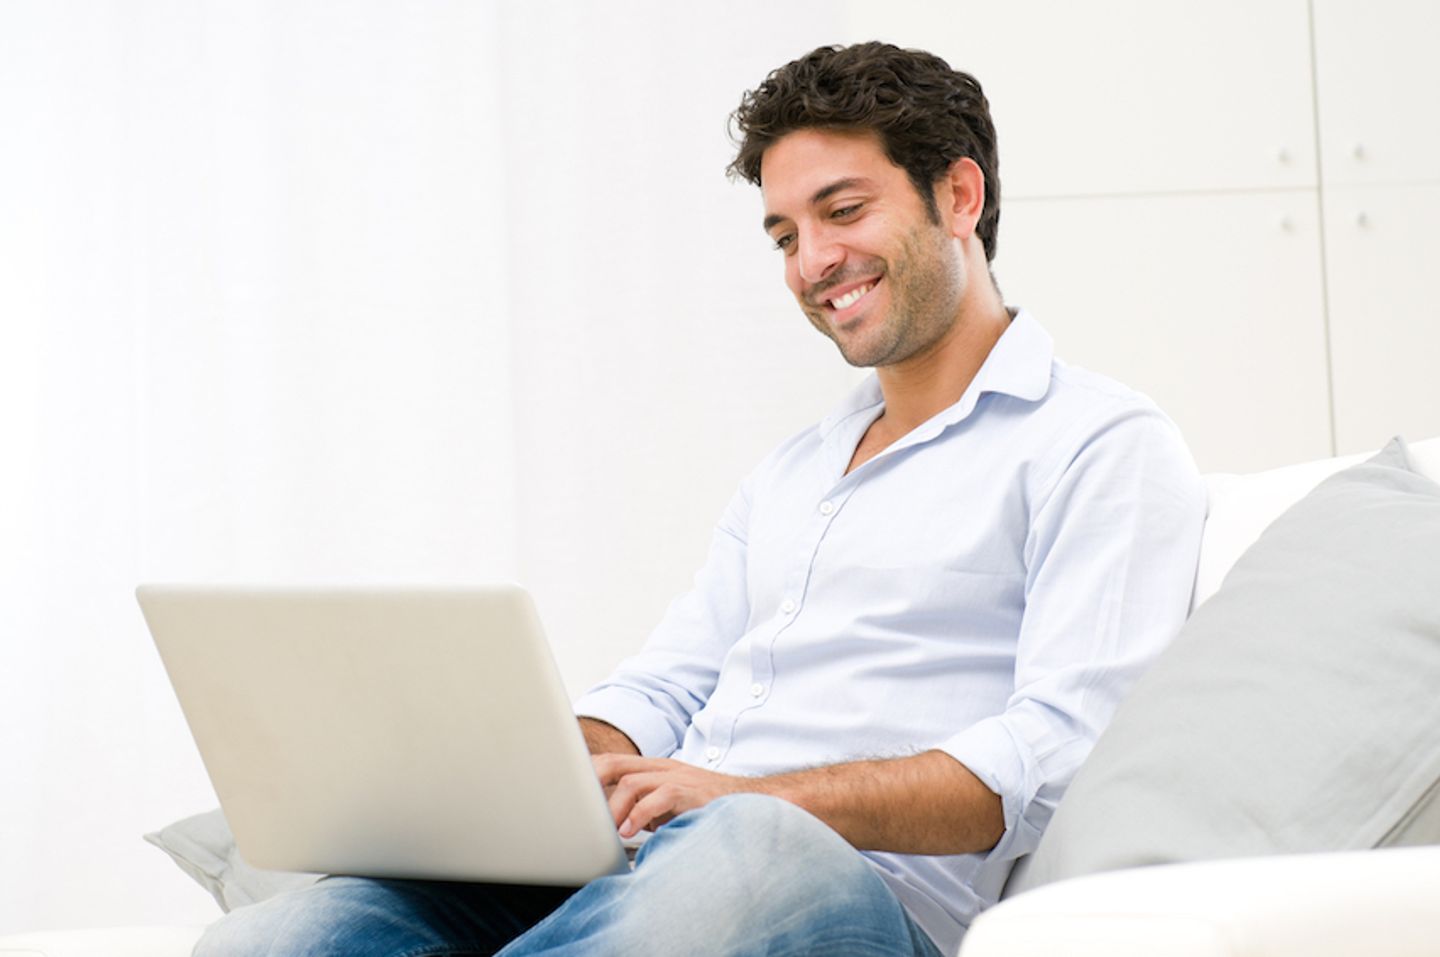 A smiling man using his laptop to create a newsletter campaign while sitting on the couch.